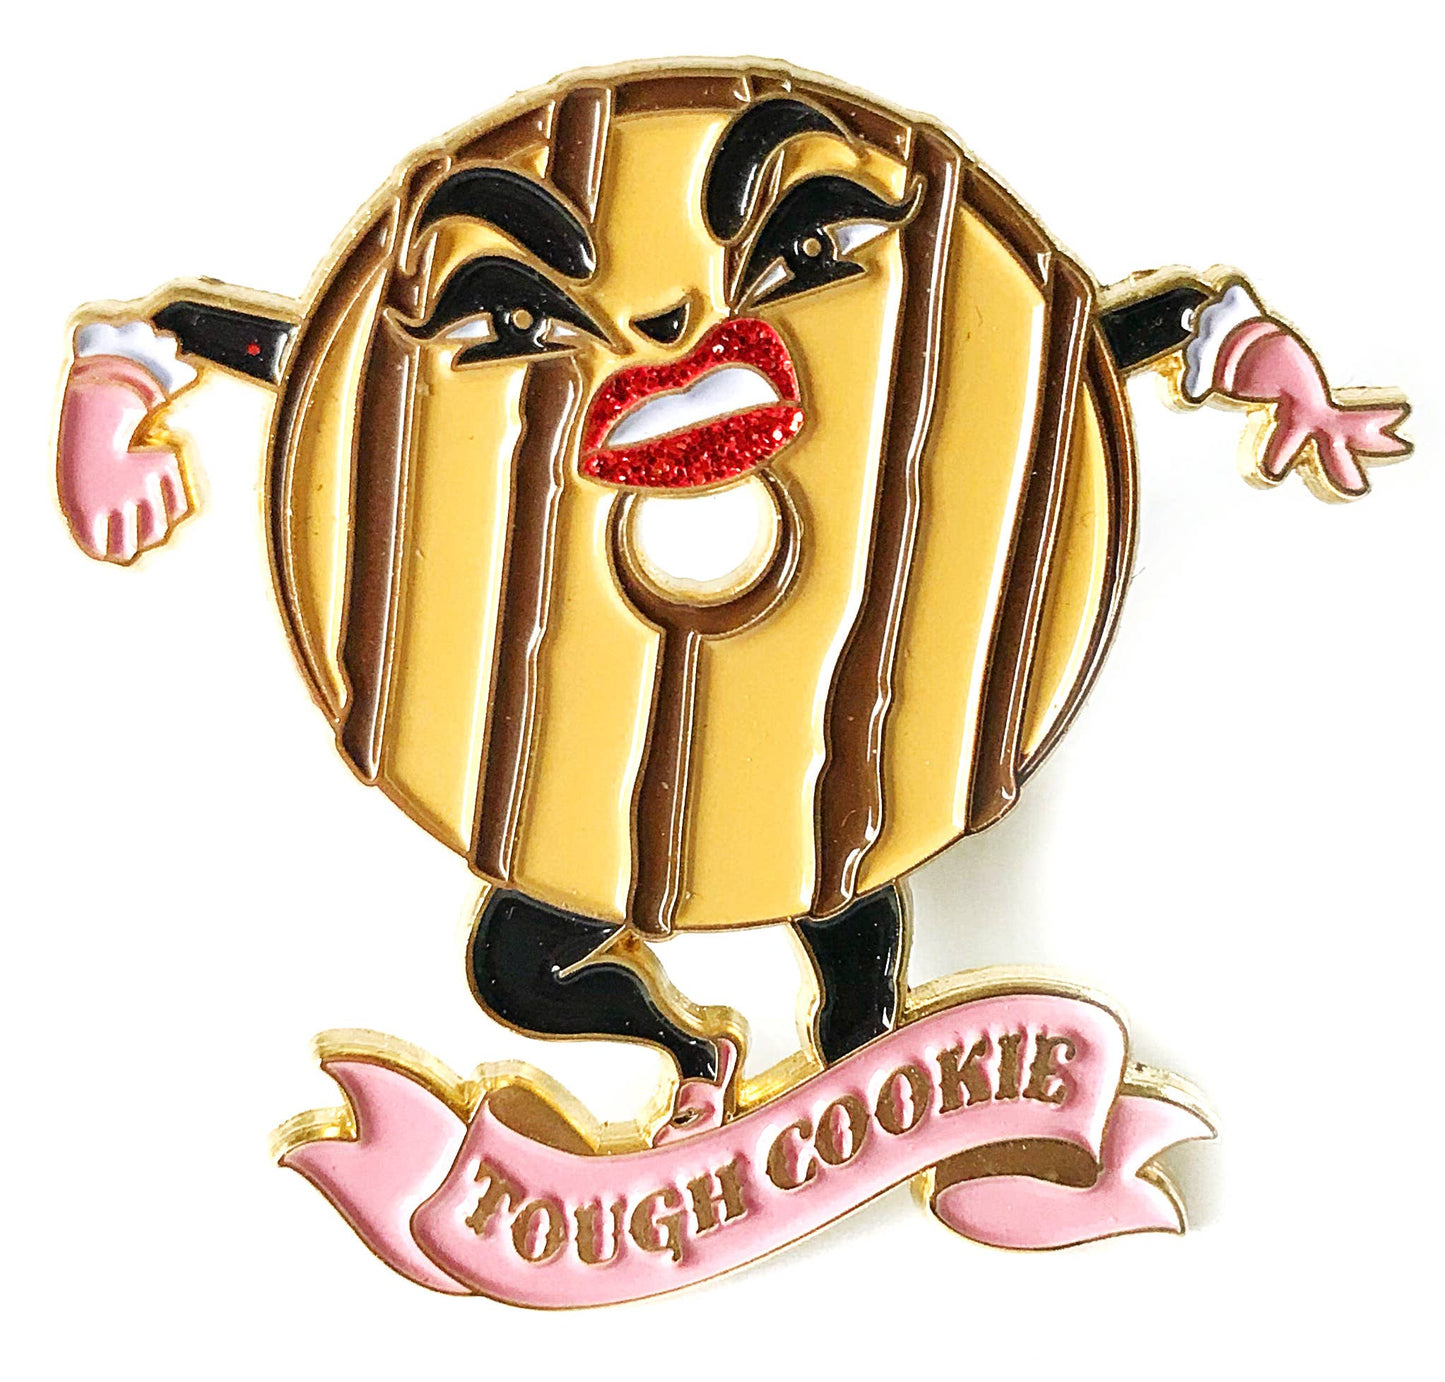 Kitschy Delish - Tough Cookie Pin with Glitter Highlights